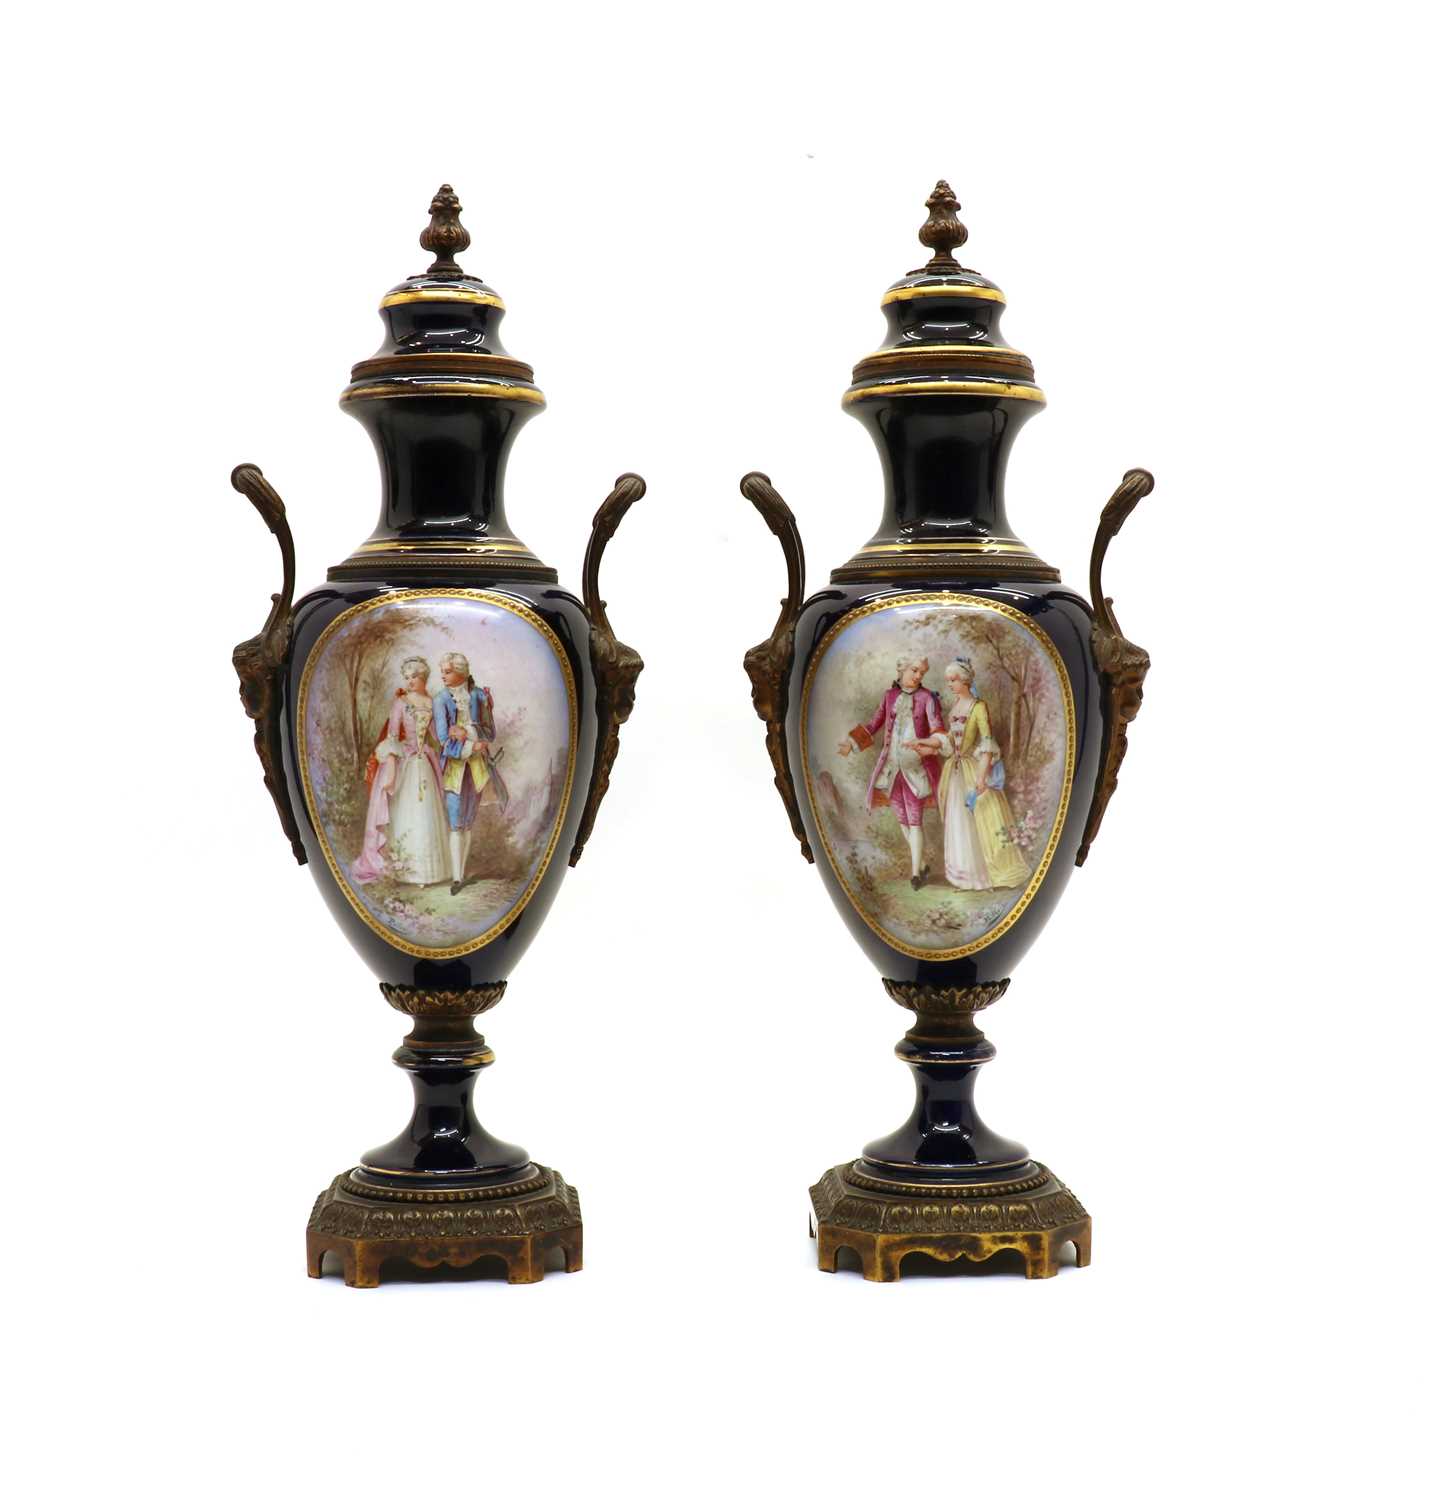 Lot 48 - A pair of French Sevres-style porcelain and gilt-metal mounted vases and covers